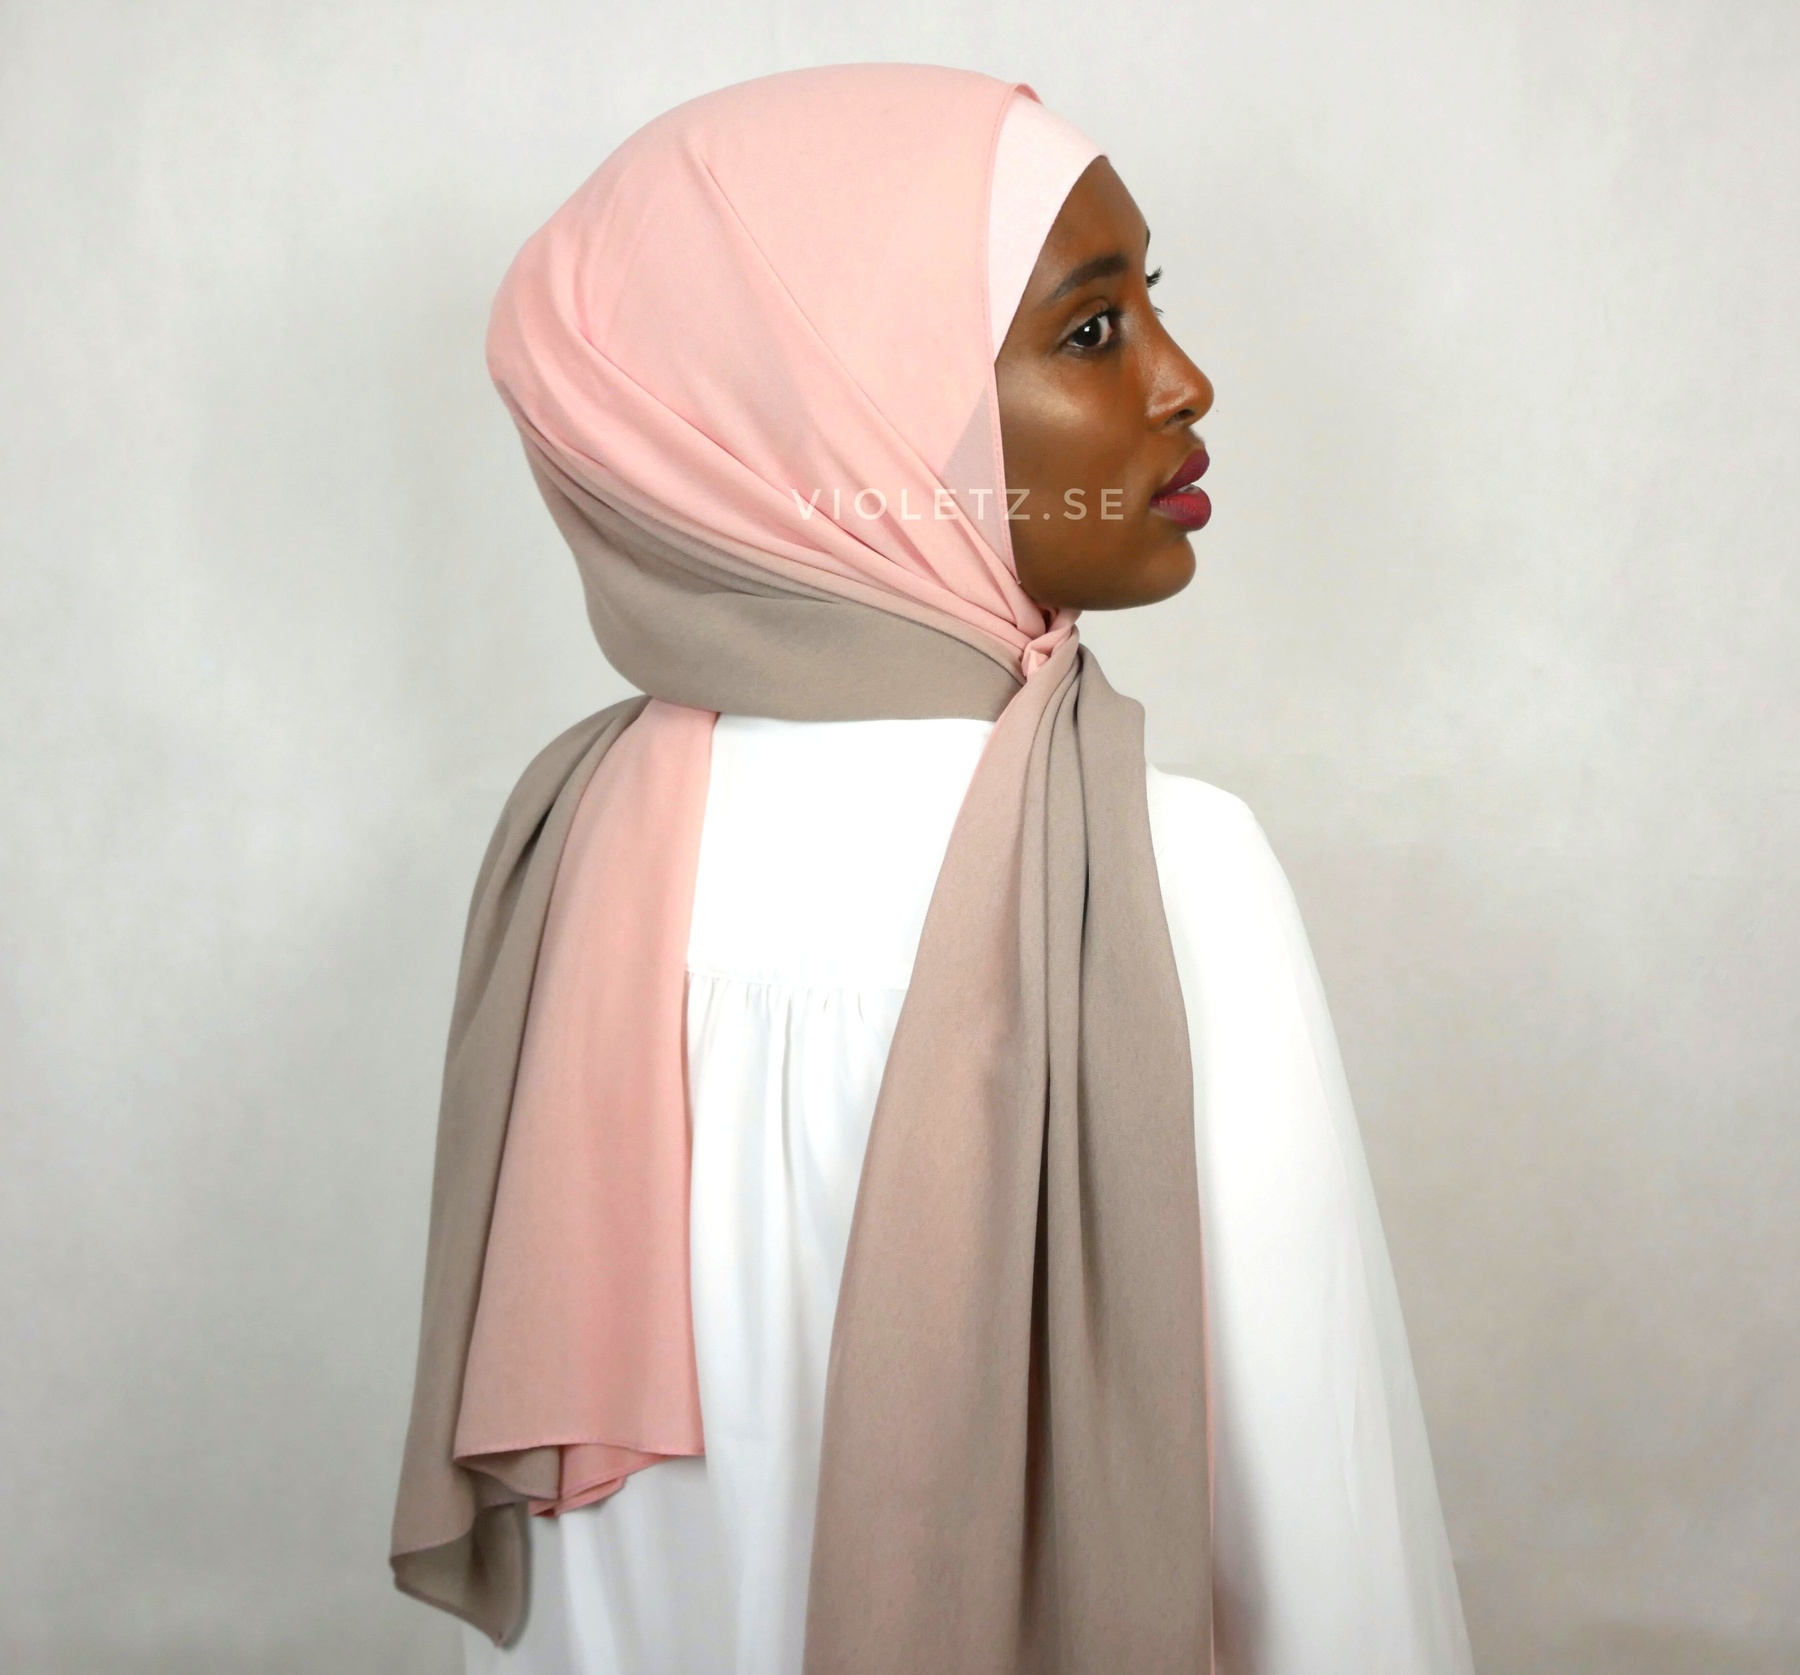 Instant Chiffong hijab med undersjal - ombré sahara